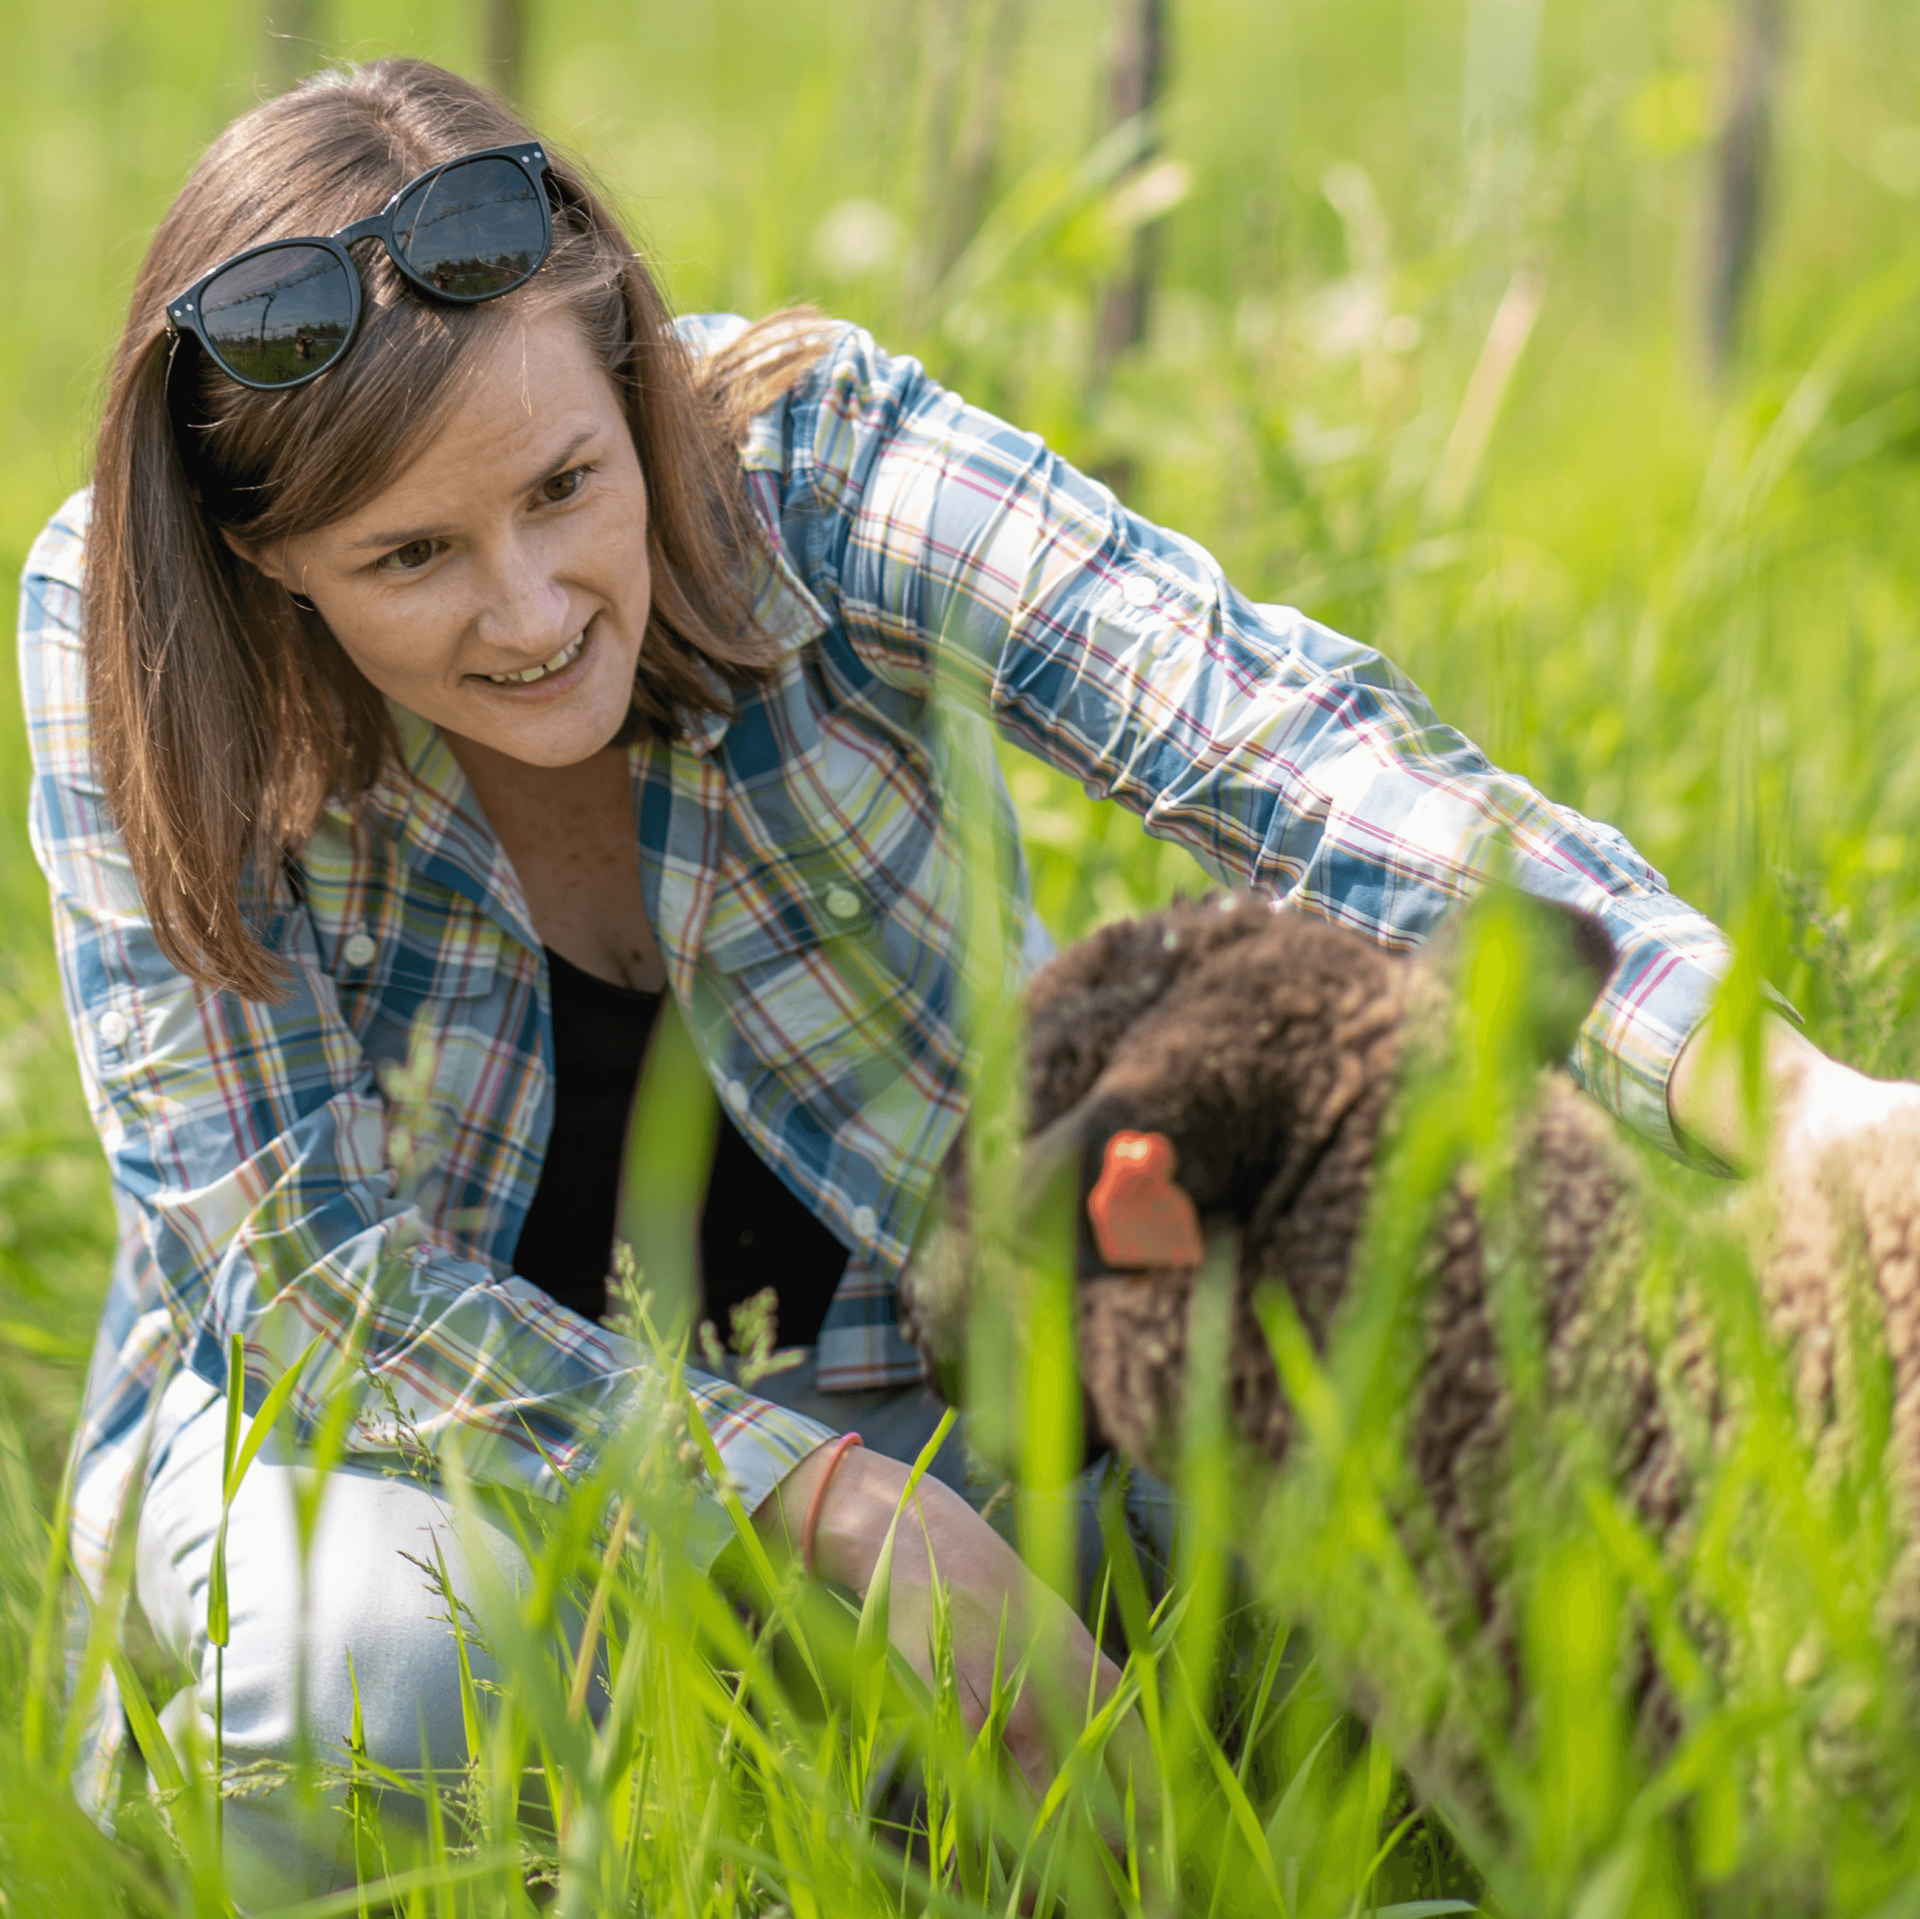 Meredith Niles examines a sheep in a field